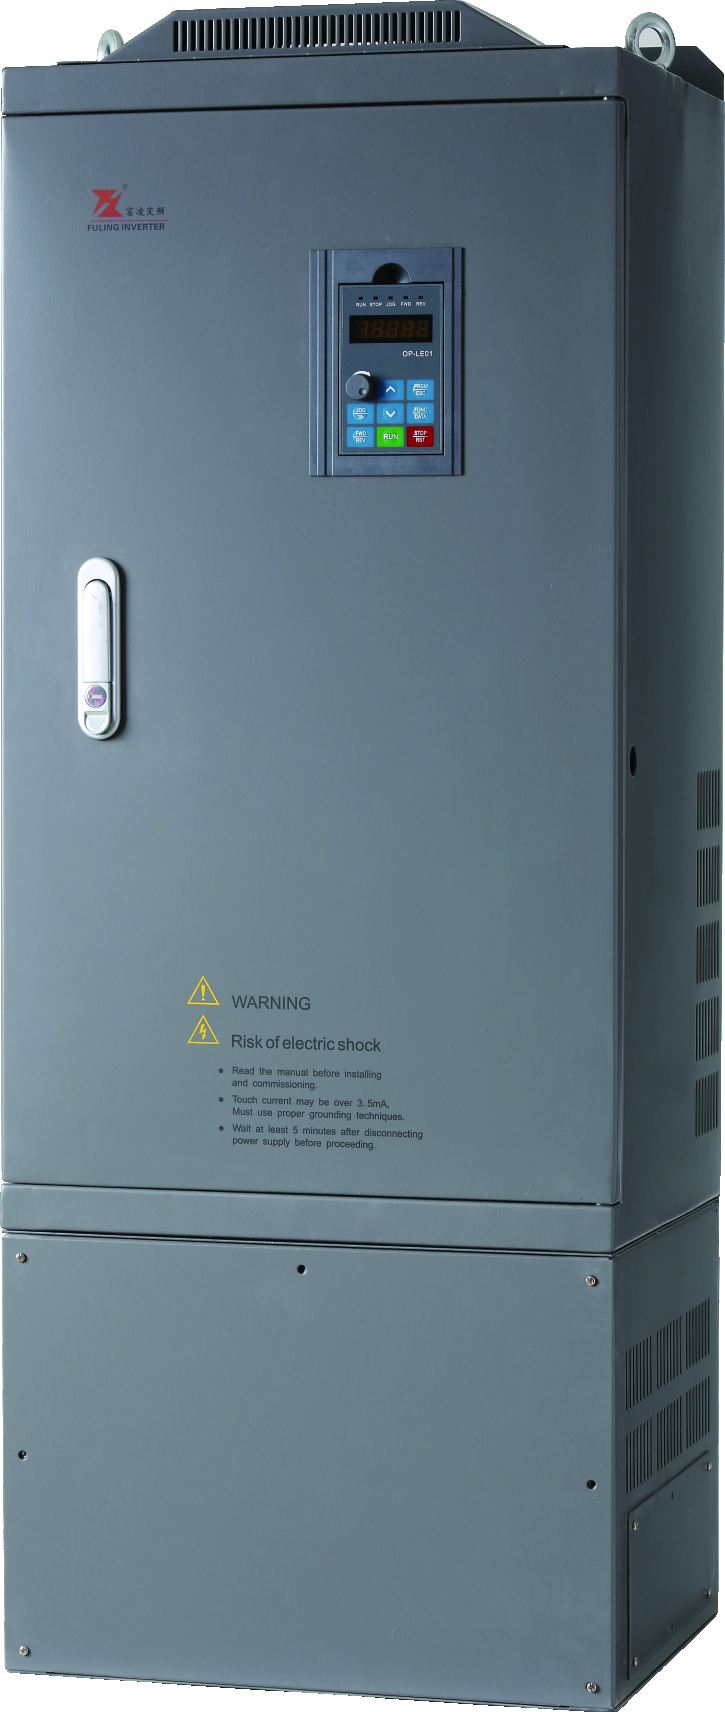 BD331 Series Constant Pressure Water Supply Drives/Inverter